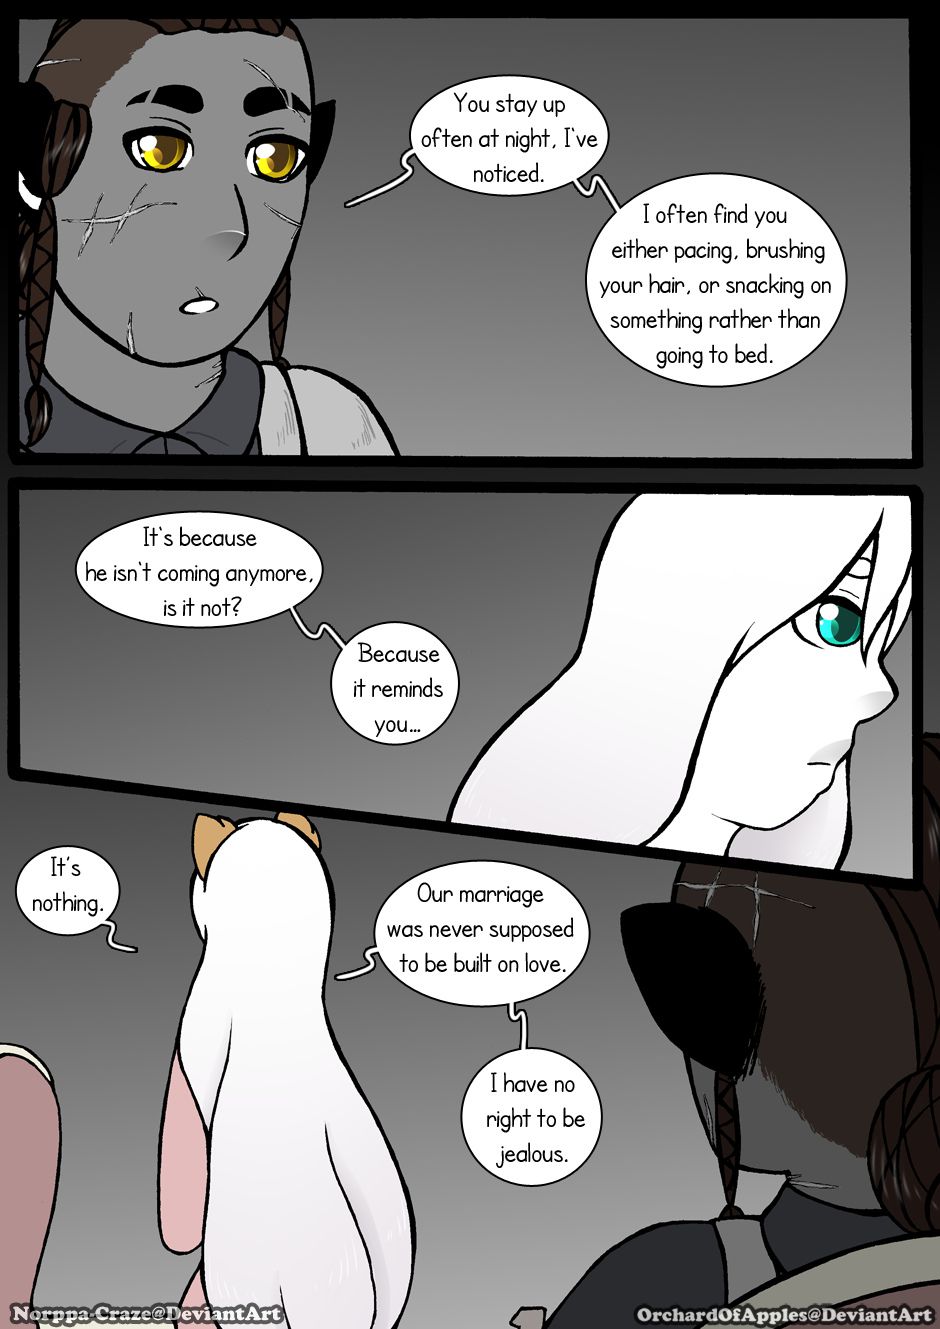 [Jeny-jen94] Between Kings and Queens [Ongoing] 313